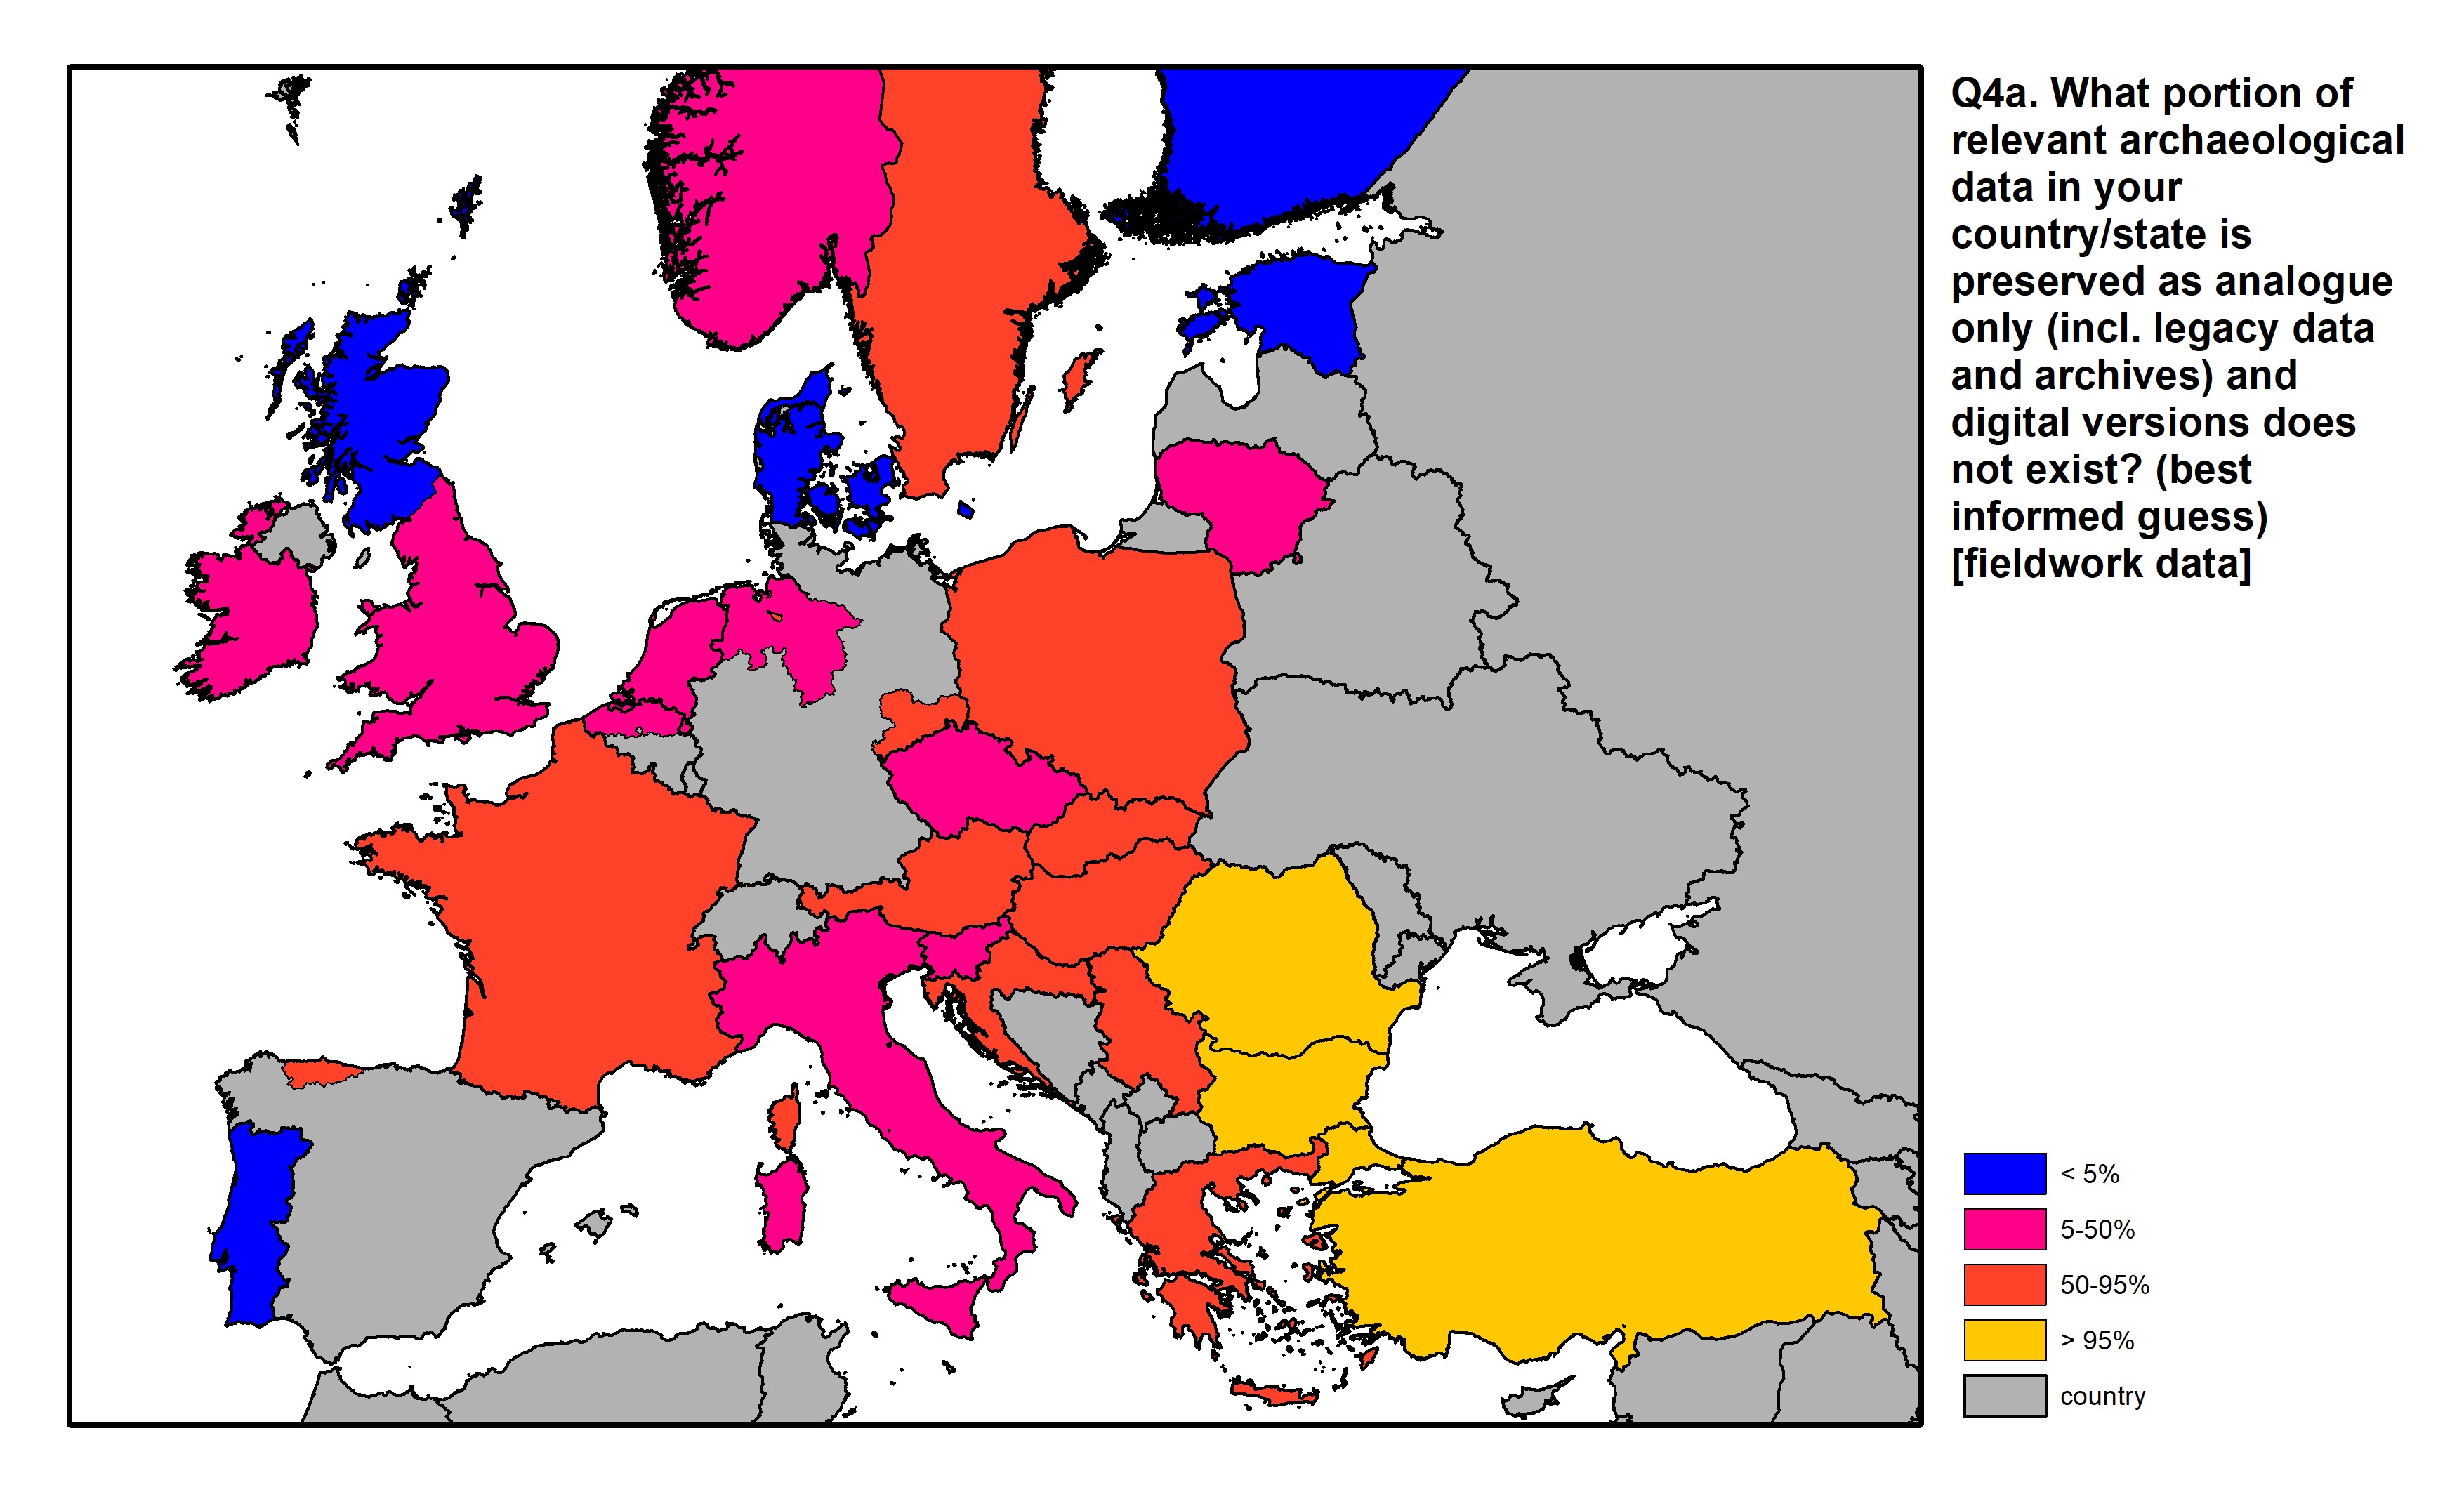 Figure 11: a map of Europe showing countries and regions in colour based on response rates to the survey question.